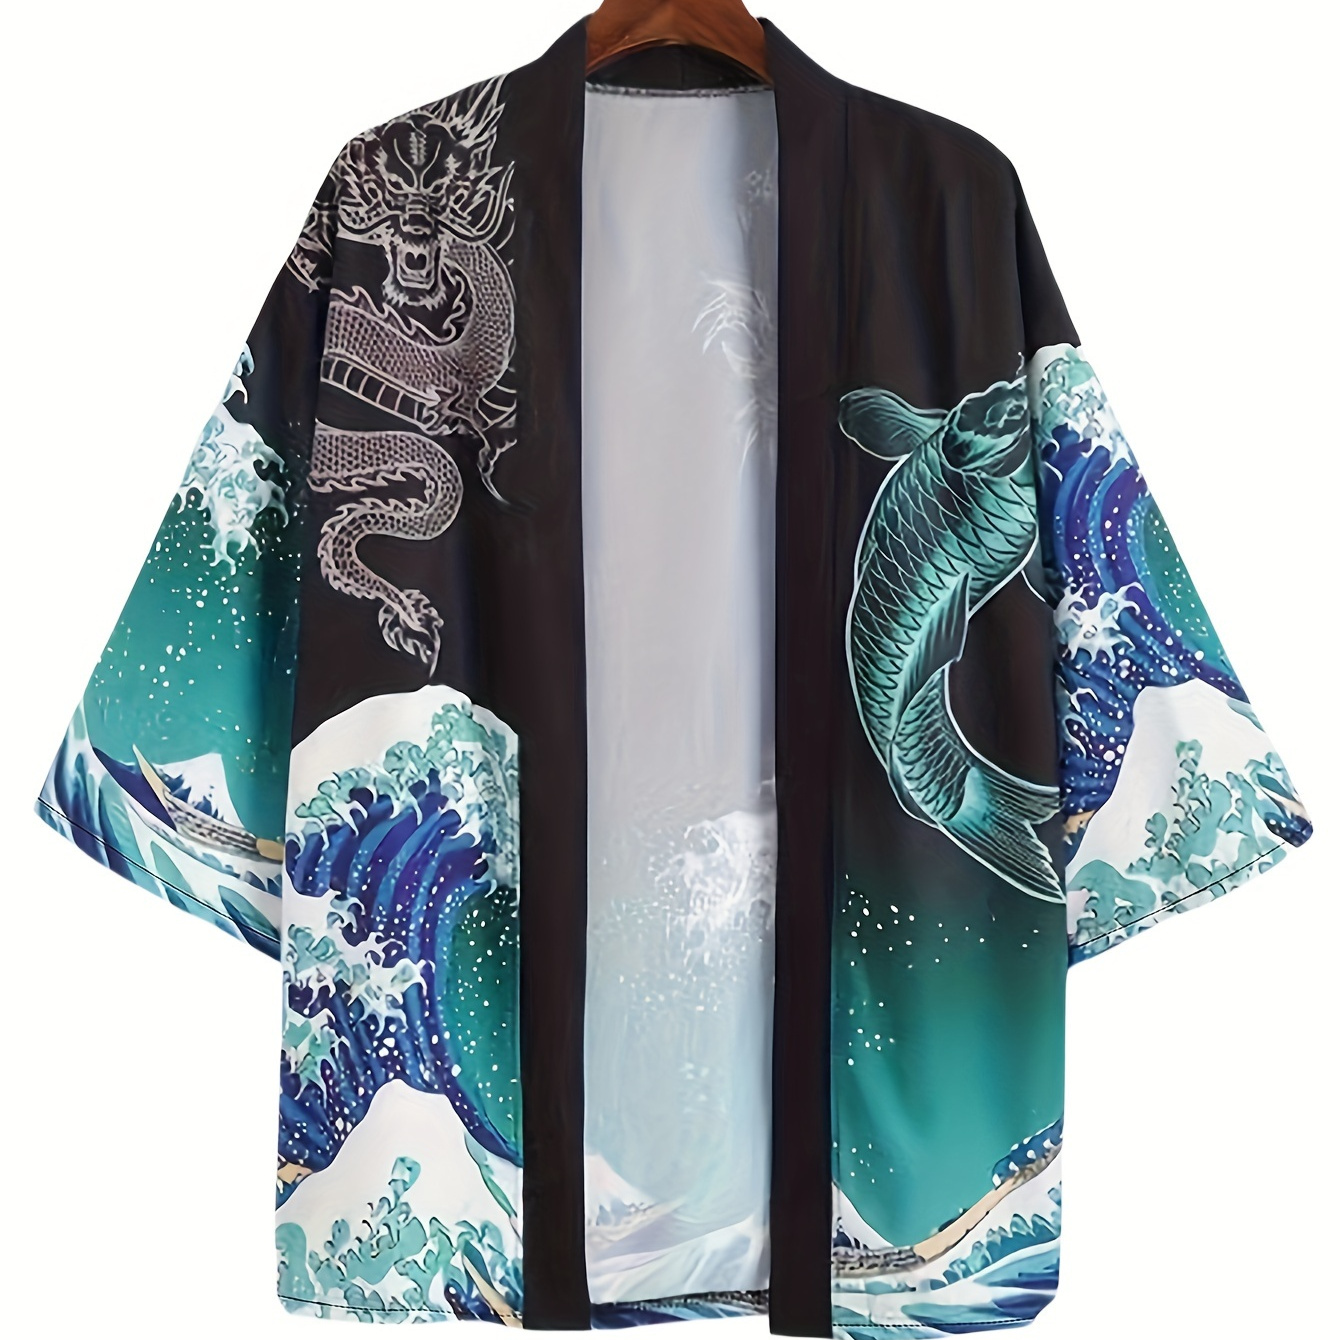 

Unisex Casual Kimono Robe, Loose-fitting Open-front Short Sleeve Night Gown, Japanese Style Print Lounge Wear For Home Wear & Summer Sleepwear